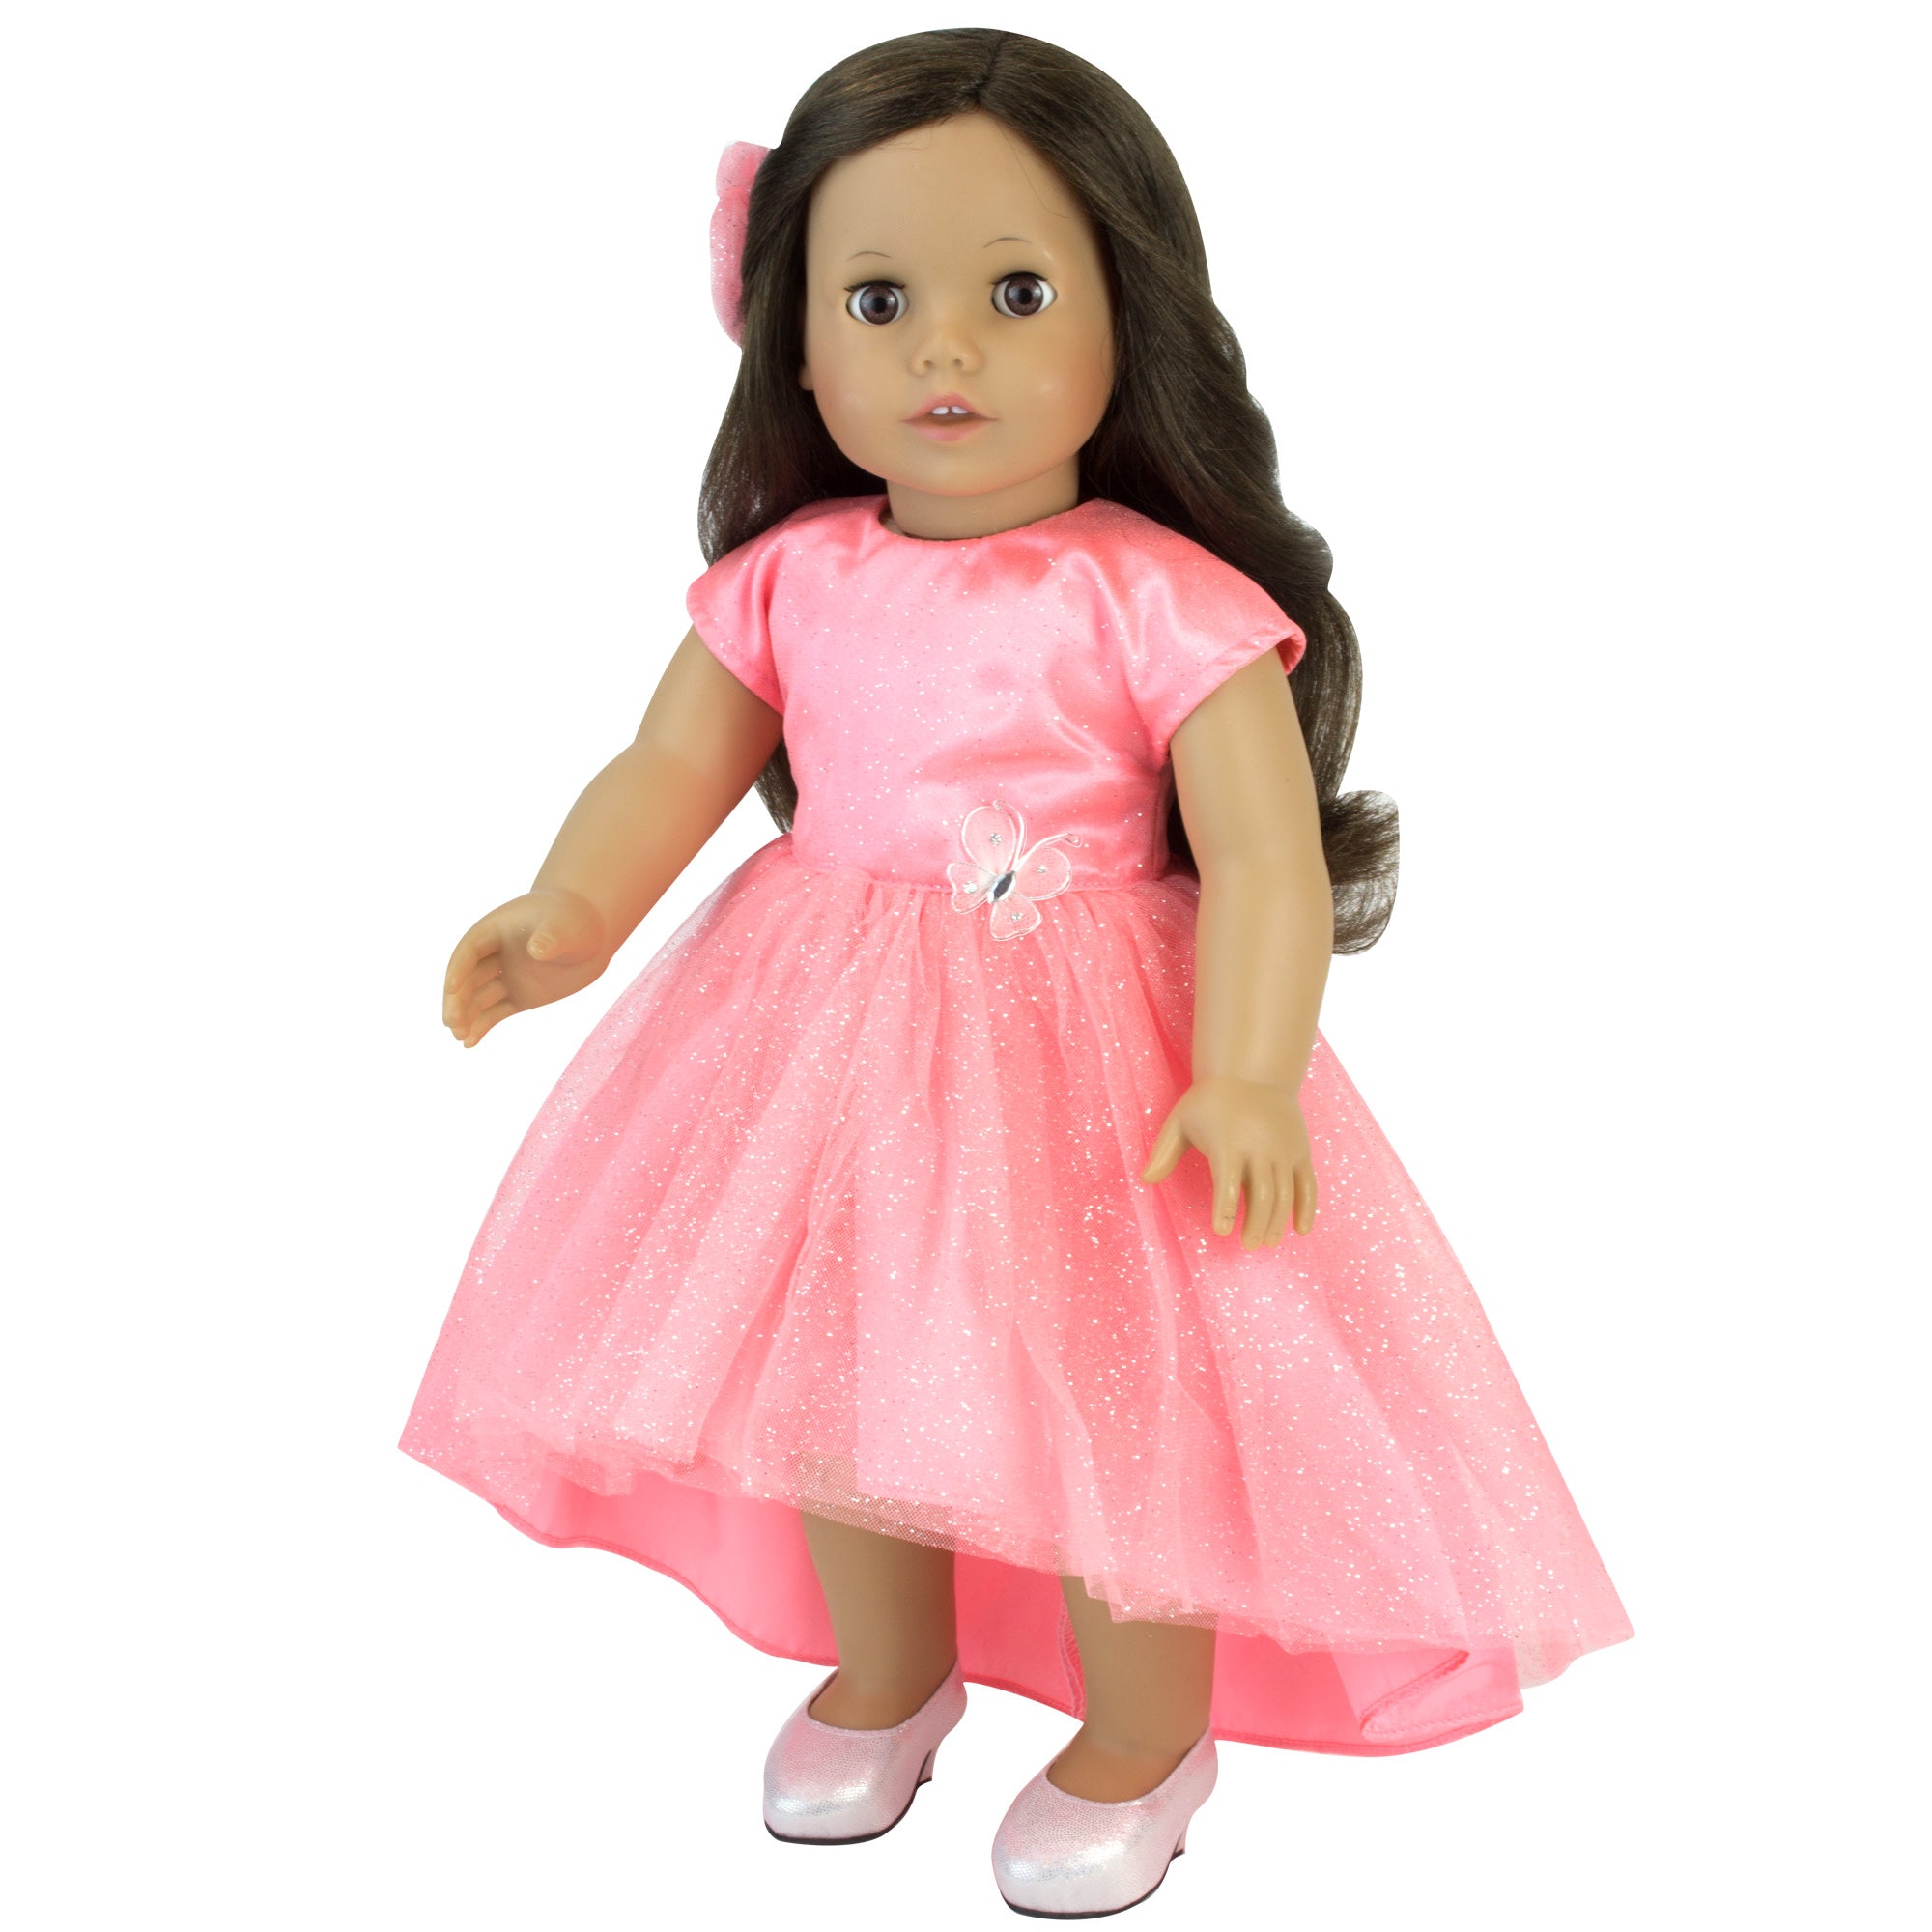  Sophia's Striped Dress with Tulle, Glitter Leggings, Hair  Accessory and Jeweled Ballet Flats Shoes for 18 Inch Dolls, Gray/Pink